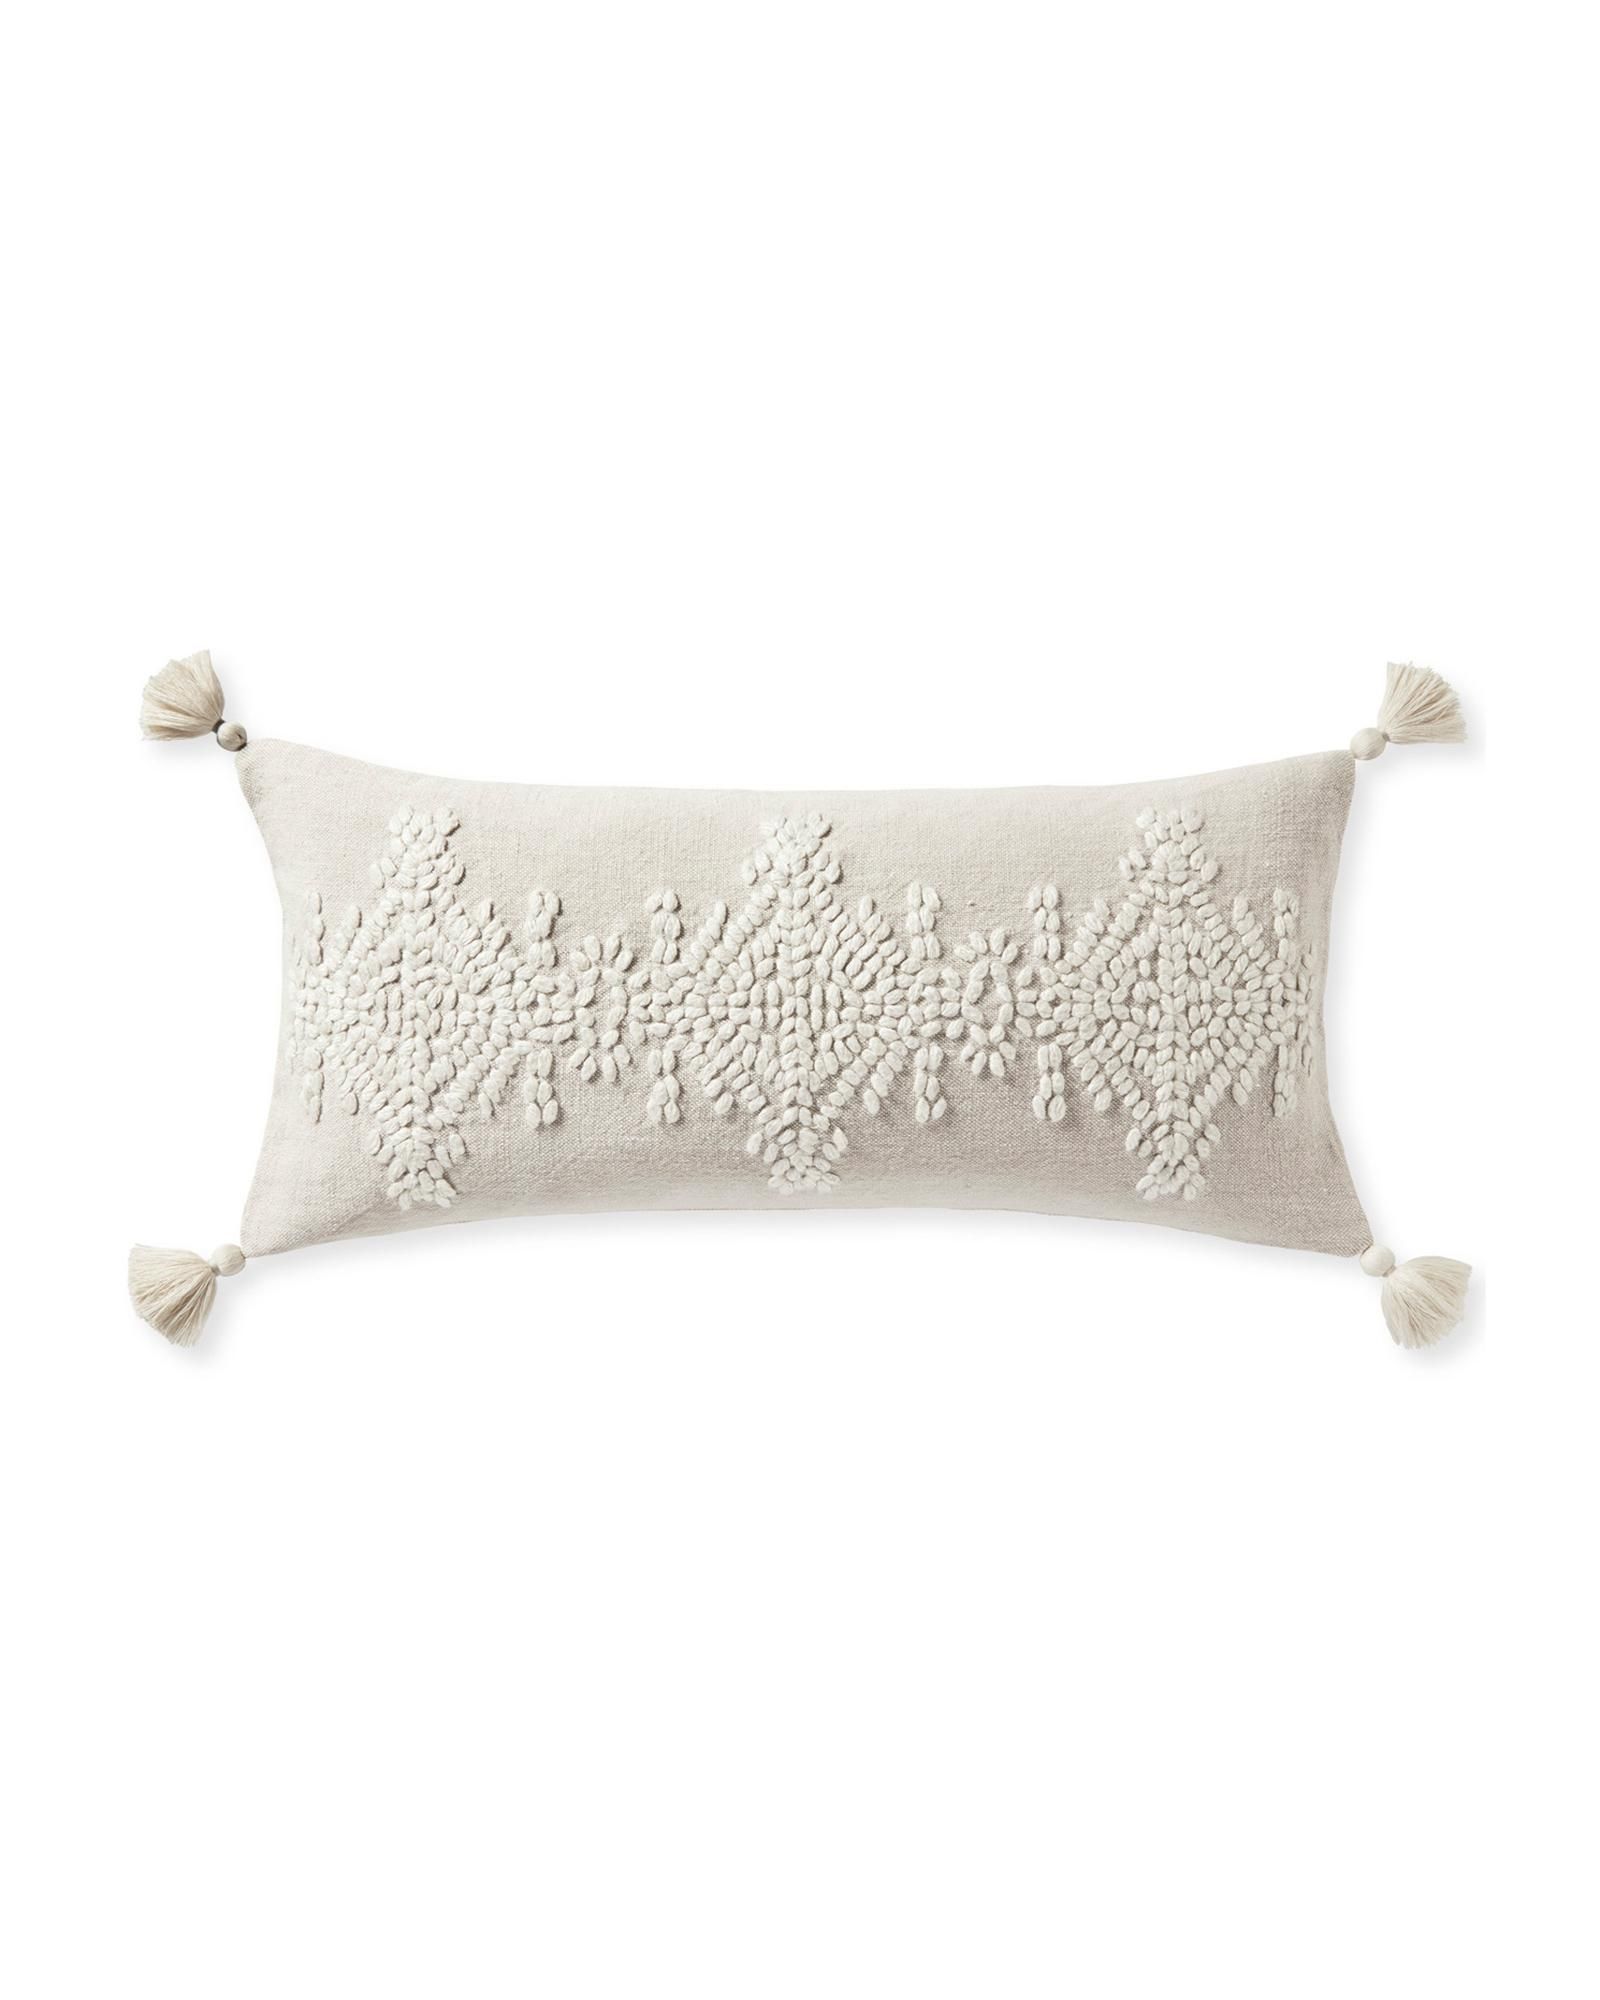 Hillview Pillow Cover | Serena and Lily